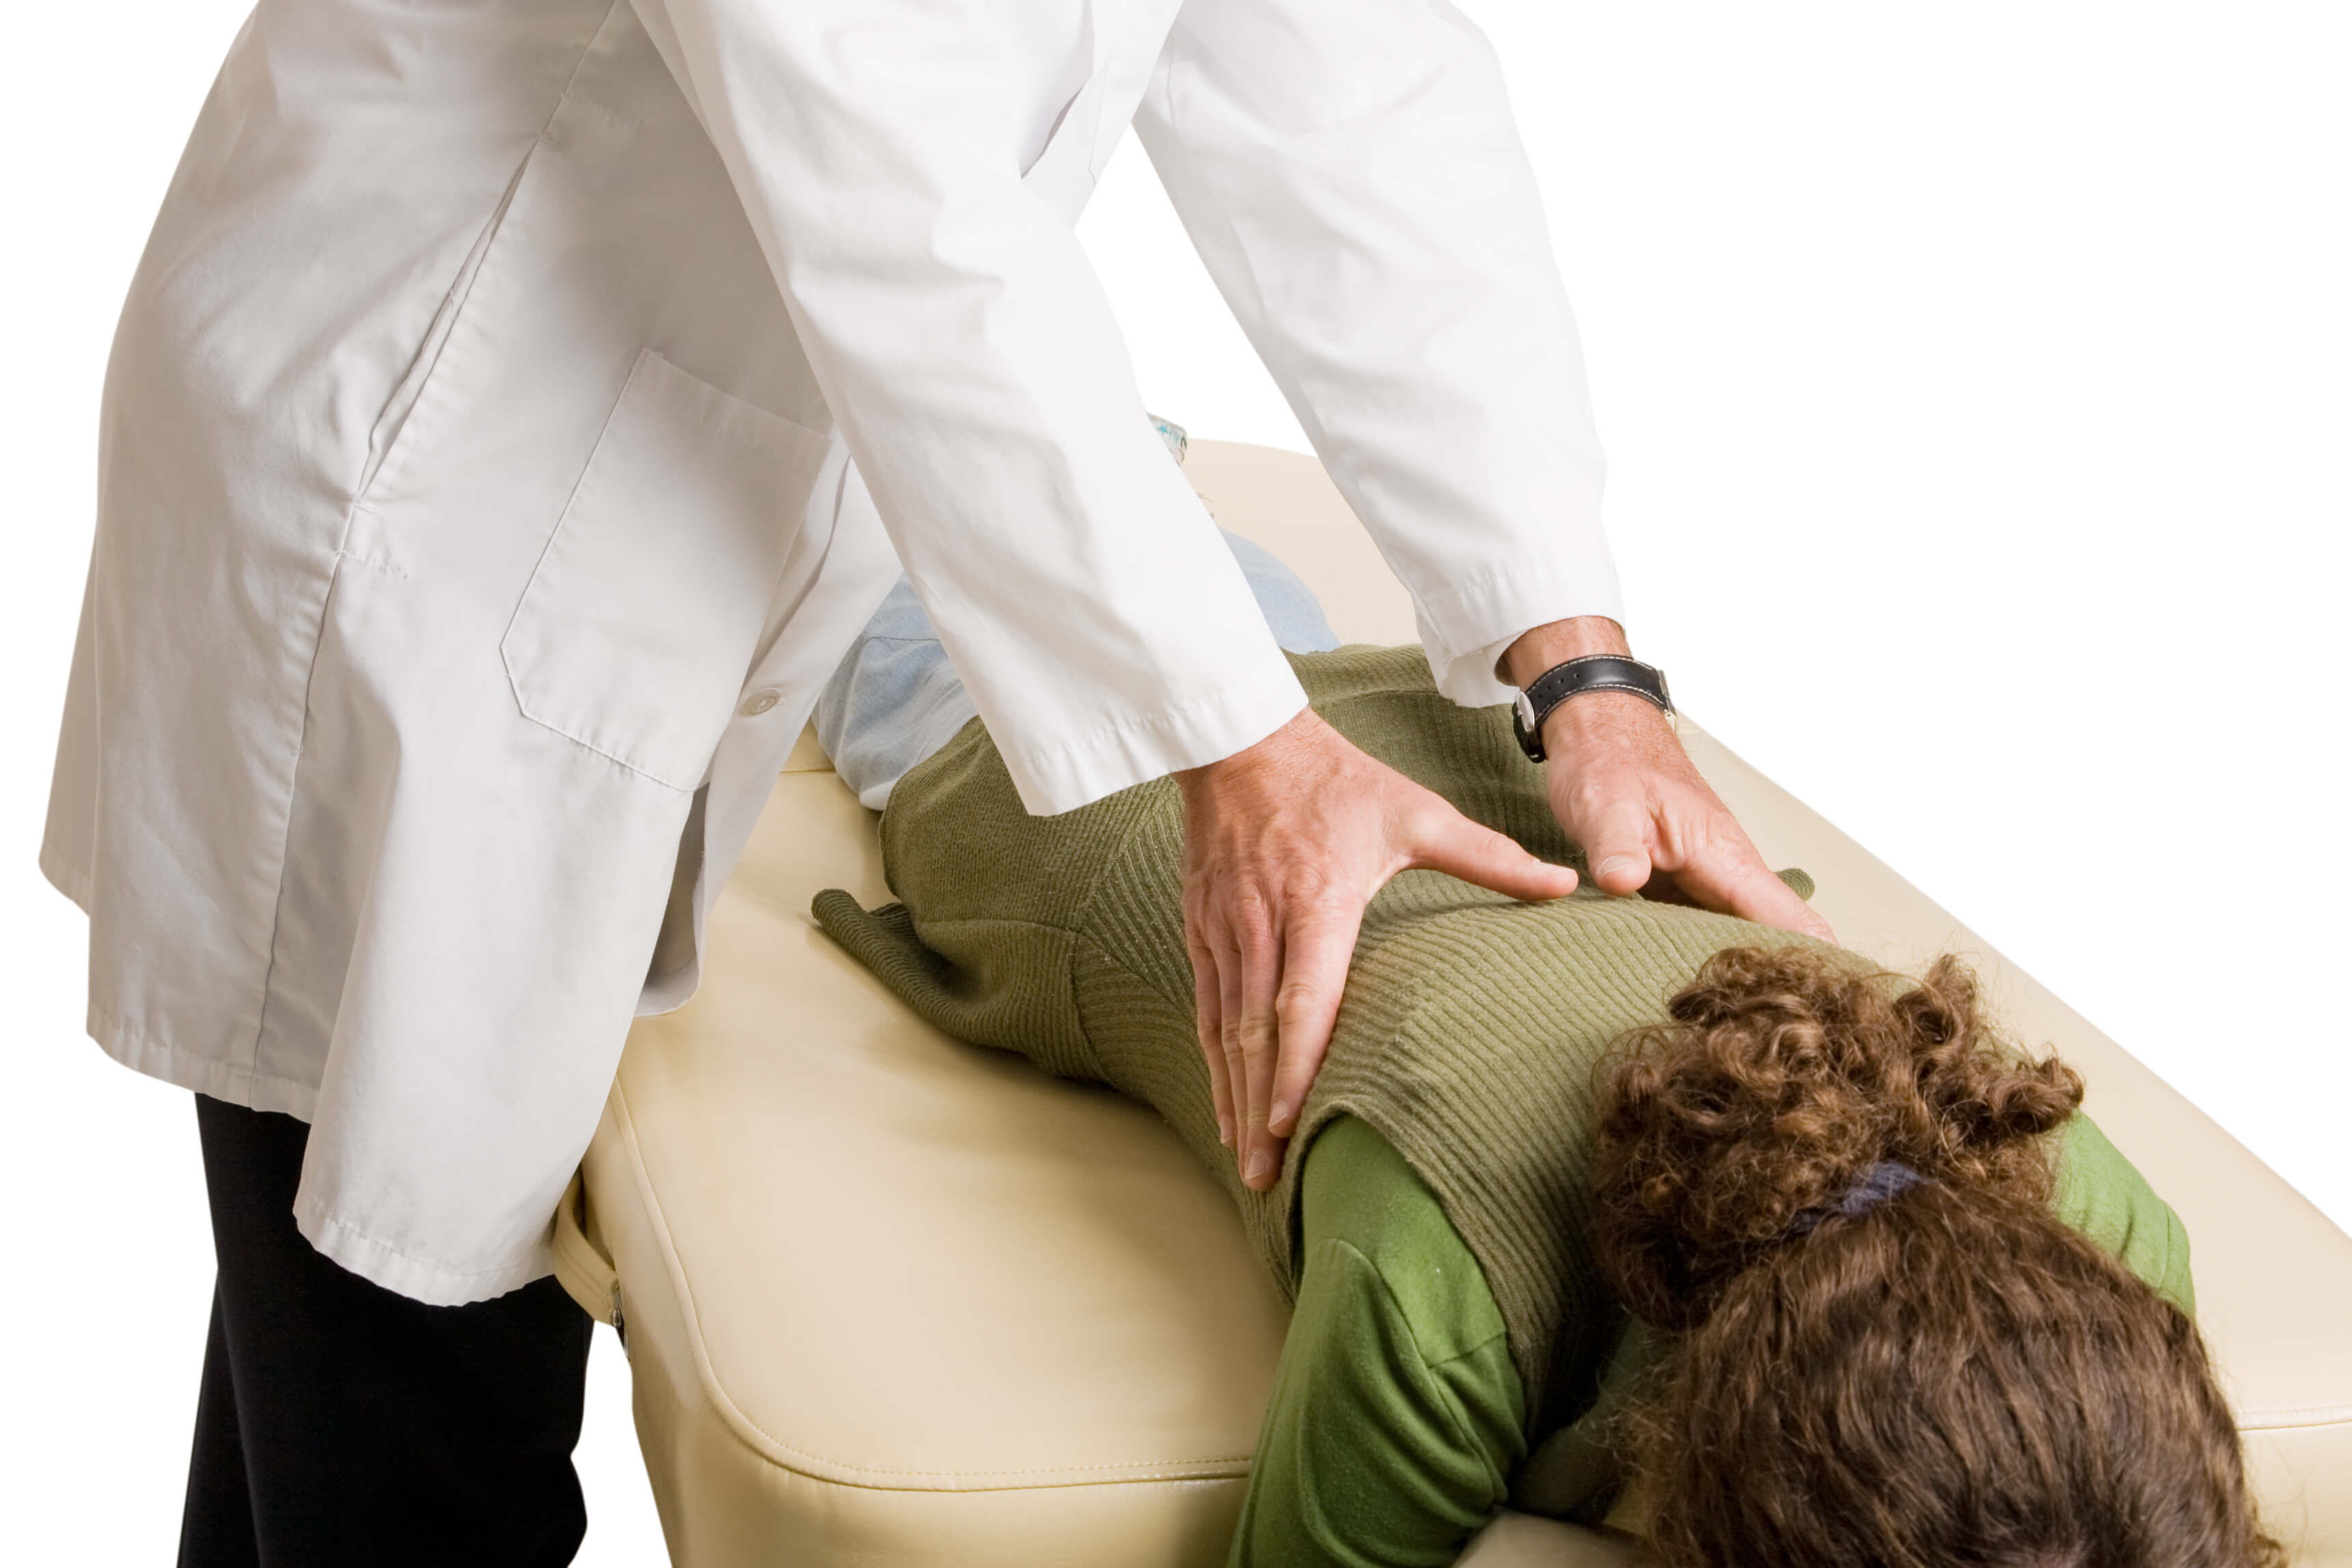 Social Security Application and using a Chiropractor